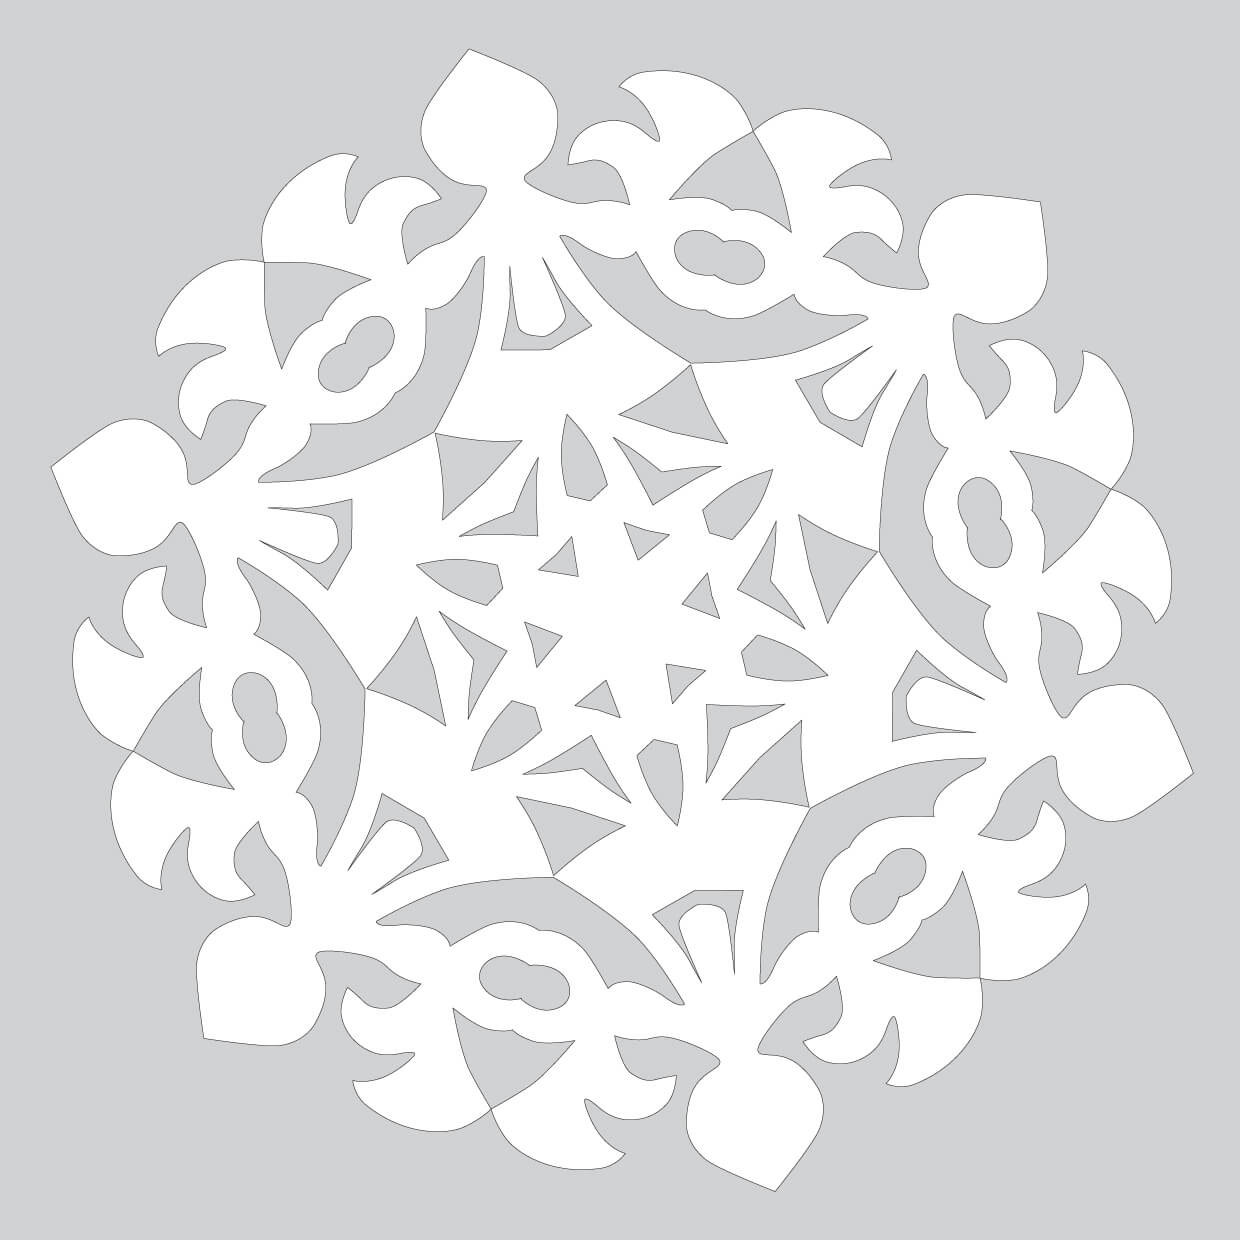 Blank Template To Draw A Pattern For Paper Snowflake | Free With Blank Snowflake Template